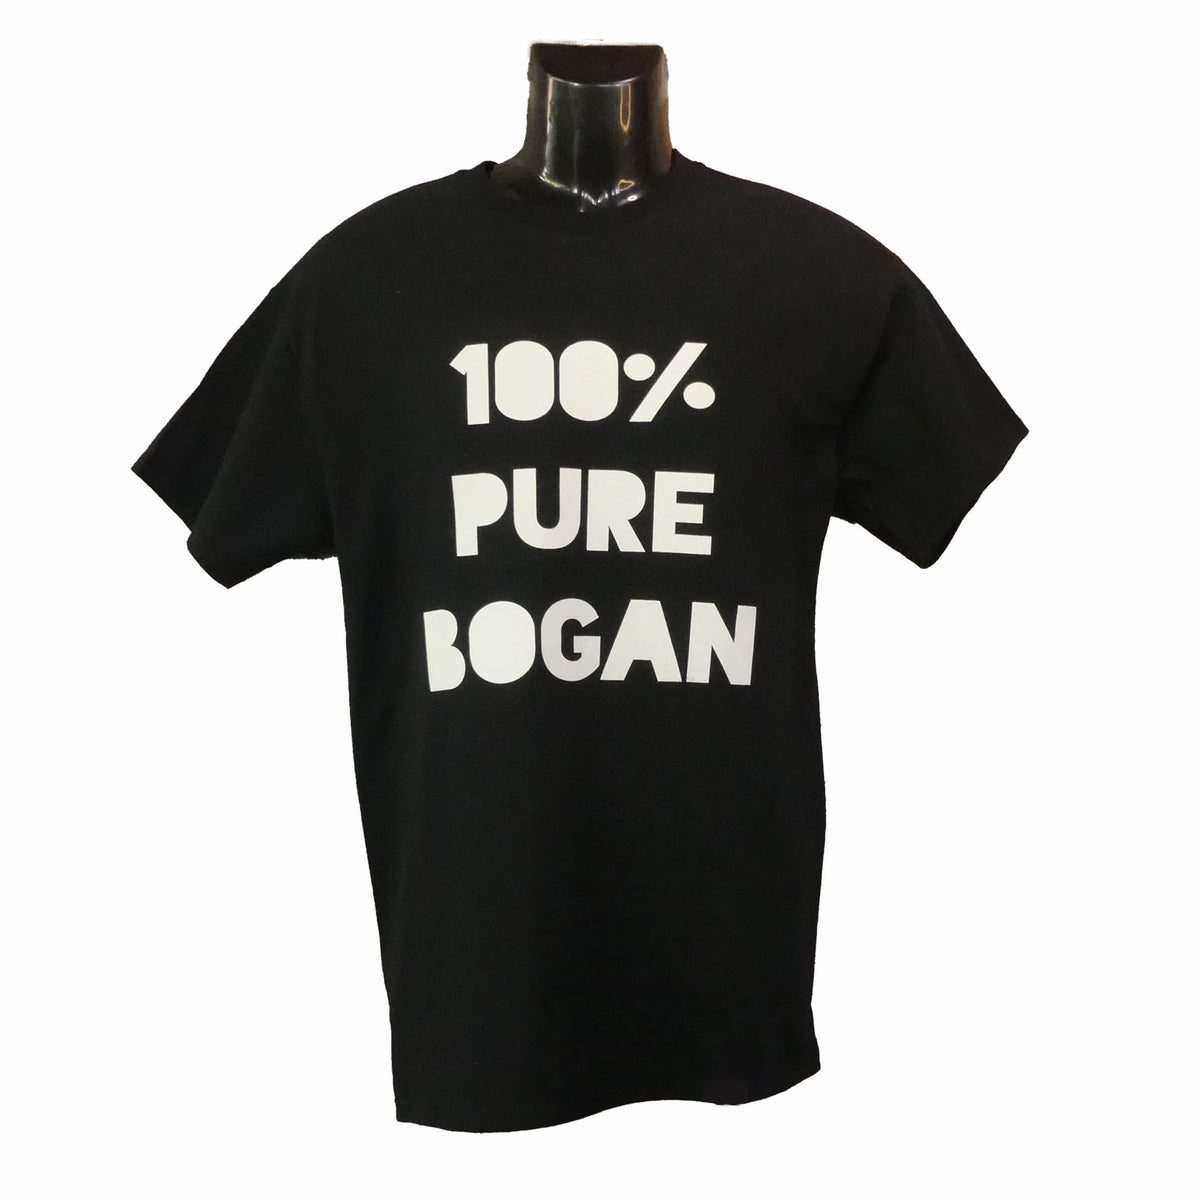 Men's black tee with 100% Pure Bogan in white letters on the front